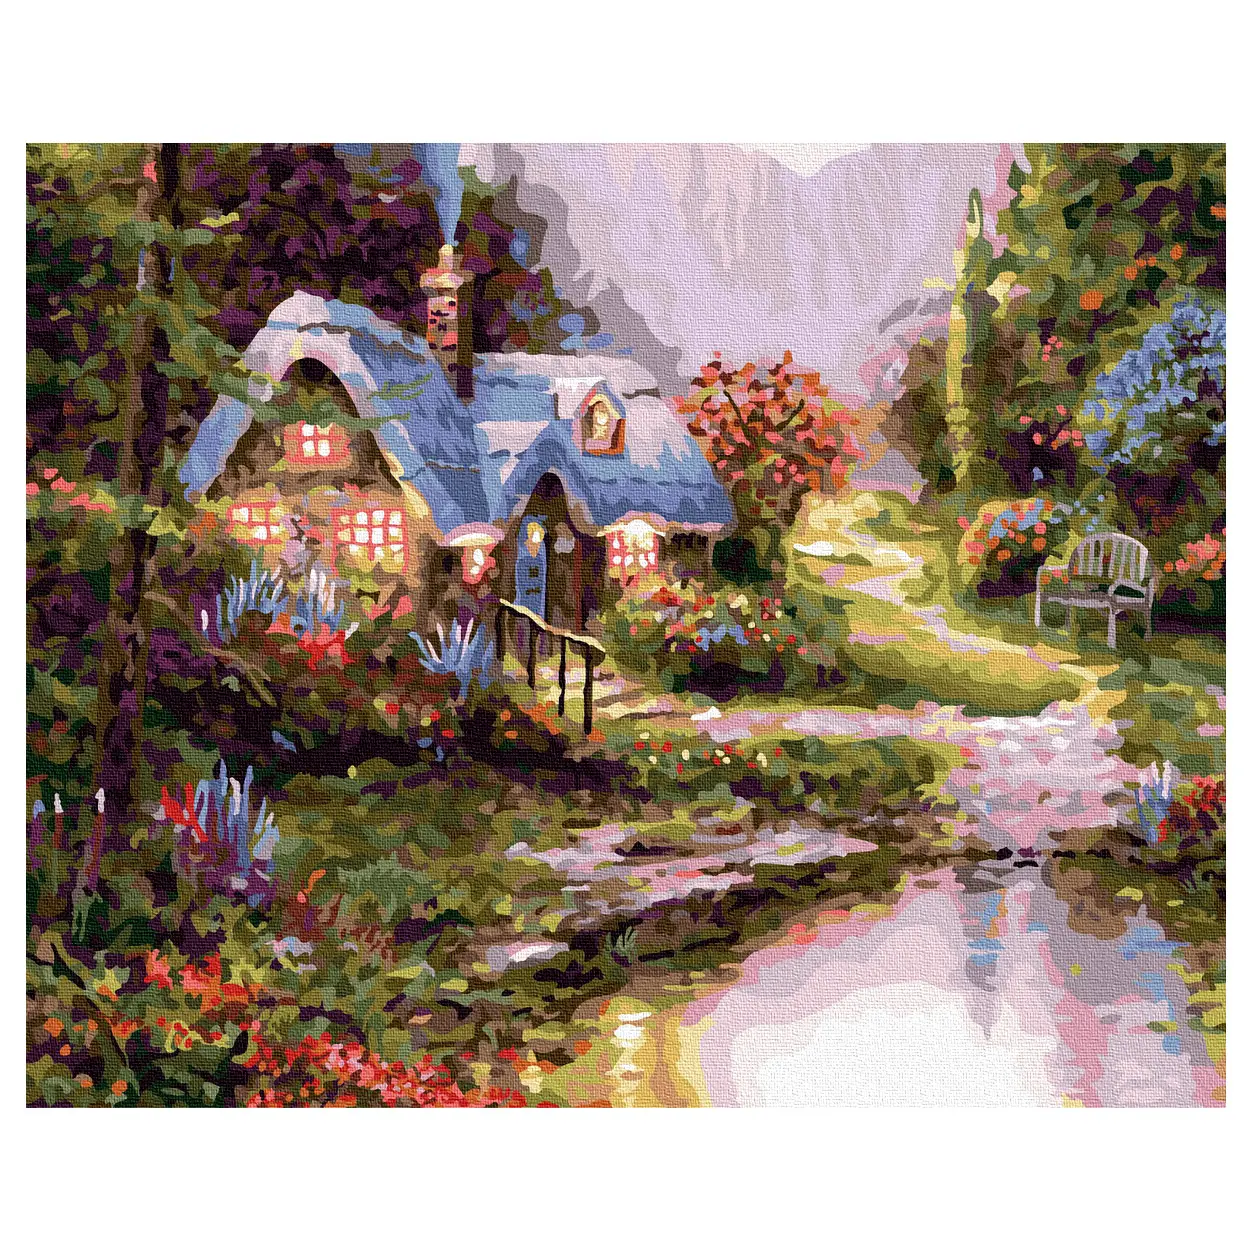 Paint boy G099 Home in Memory scenery canvas painting decorative painting wall art hand painting wholesale DIY paint by numbers